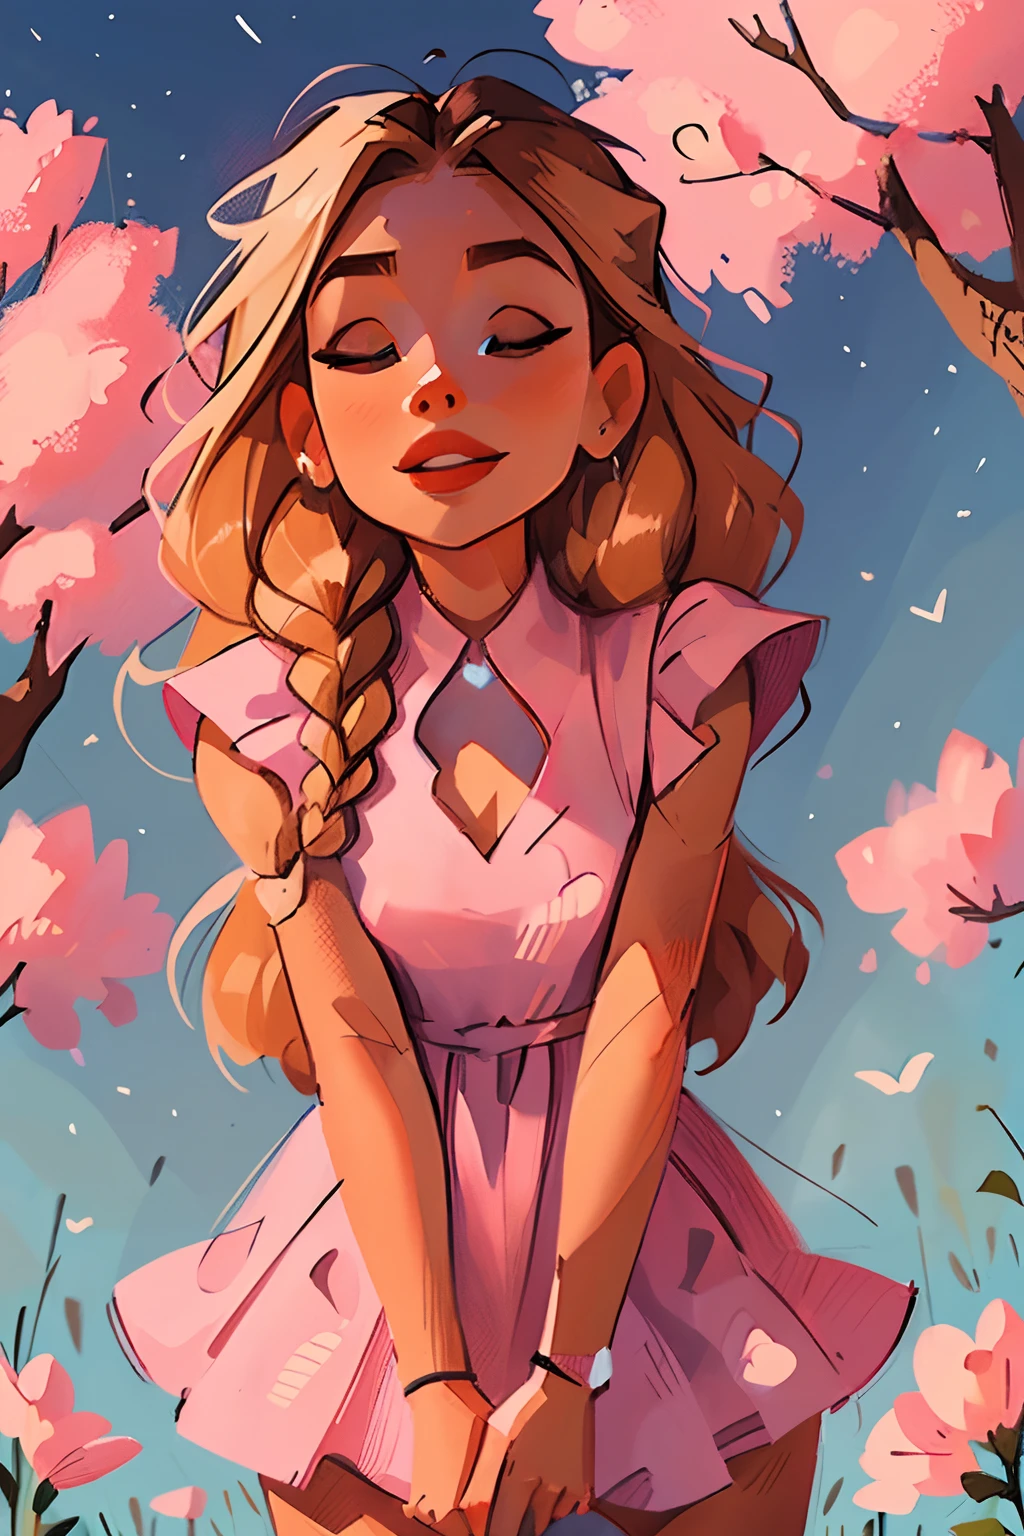 Masterpiece, highquality, (1girl), blonde hair, (two tight braids), twinbraids, framing face, full bangs, night sky, cherry blossoms, detailed face, pink glowing eyes, ultra-detailed eyes, ((small breasts)), see trough dress, revealing dress, pink floating dress, romantic sexy dress, face focus, shiny skin, nigth sky, moonlight, moon, (wings 1.0), magic girl, flying pink stars, heart-shaped_pupils, (Masterpiece:1.3), (Best quality:1.3), High resolution, Couboy shot, leaning forward, Forward-facing body, (une jolie fille:1.3), seulement, peau blanche,  poitrine, Eight-headed person, cheveux bleu clair, (curly hair:1.2), (Cheveux courts:1.1), (bangs blunt bangs:1.2), Beaux cheveux, yeux bleus, beautiful detailed eyes, ouvrir bouche, heart, sourire joyeux, one eye closed, servante, volant, Minijupe, earrings, (fond blanc:1.2), sinple background, Shadow lighting,